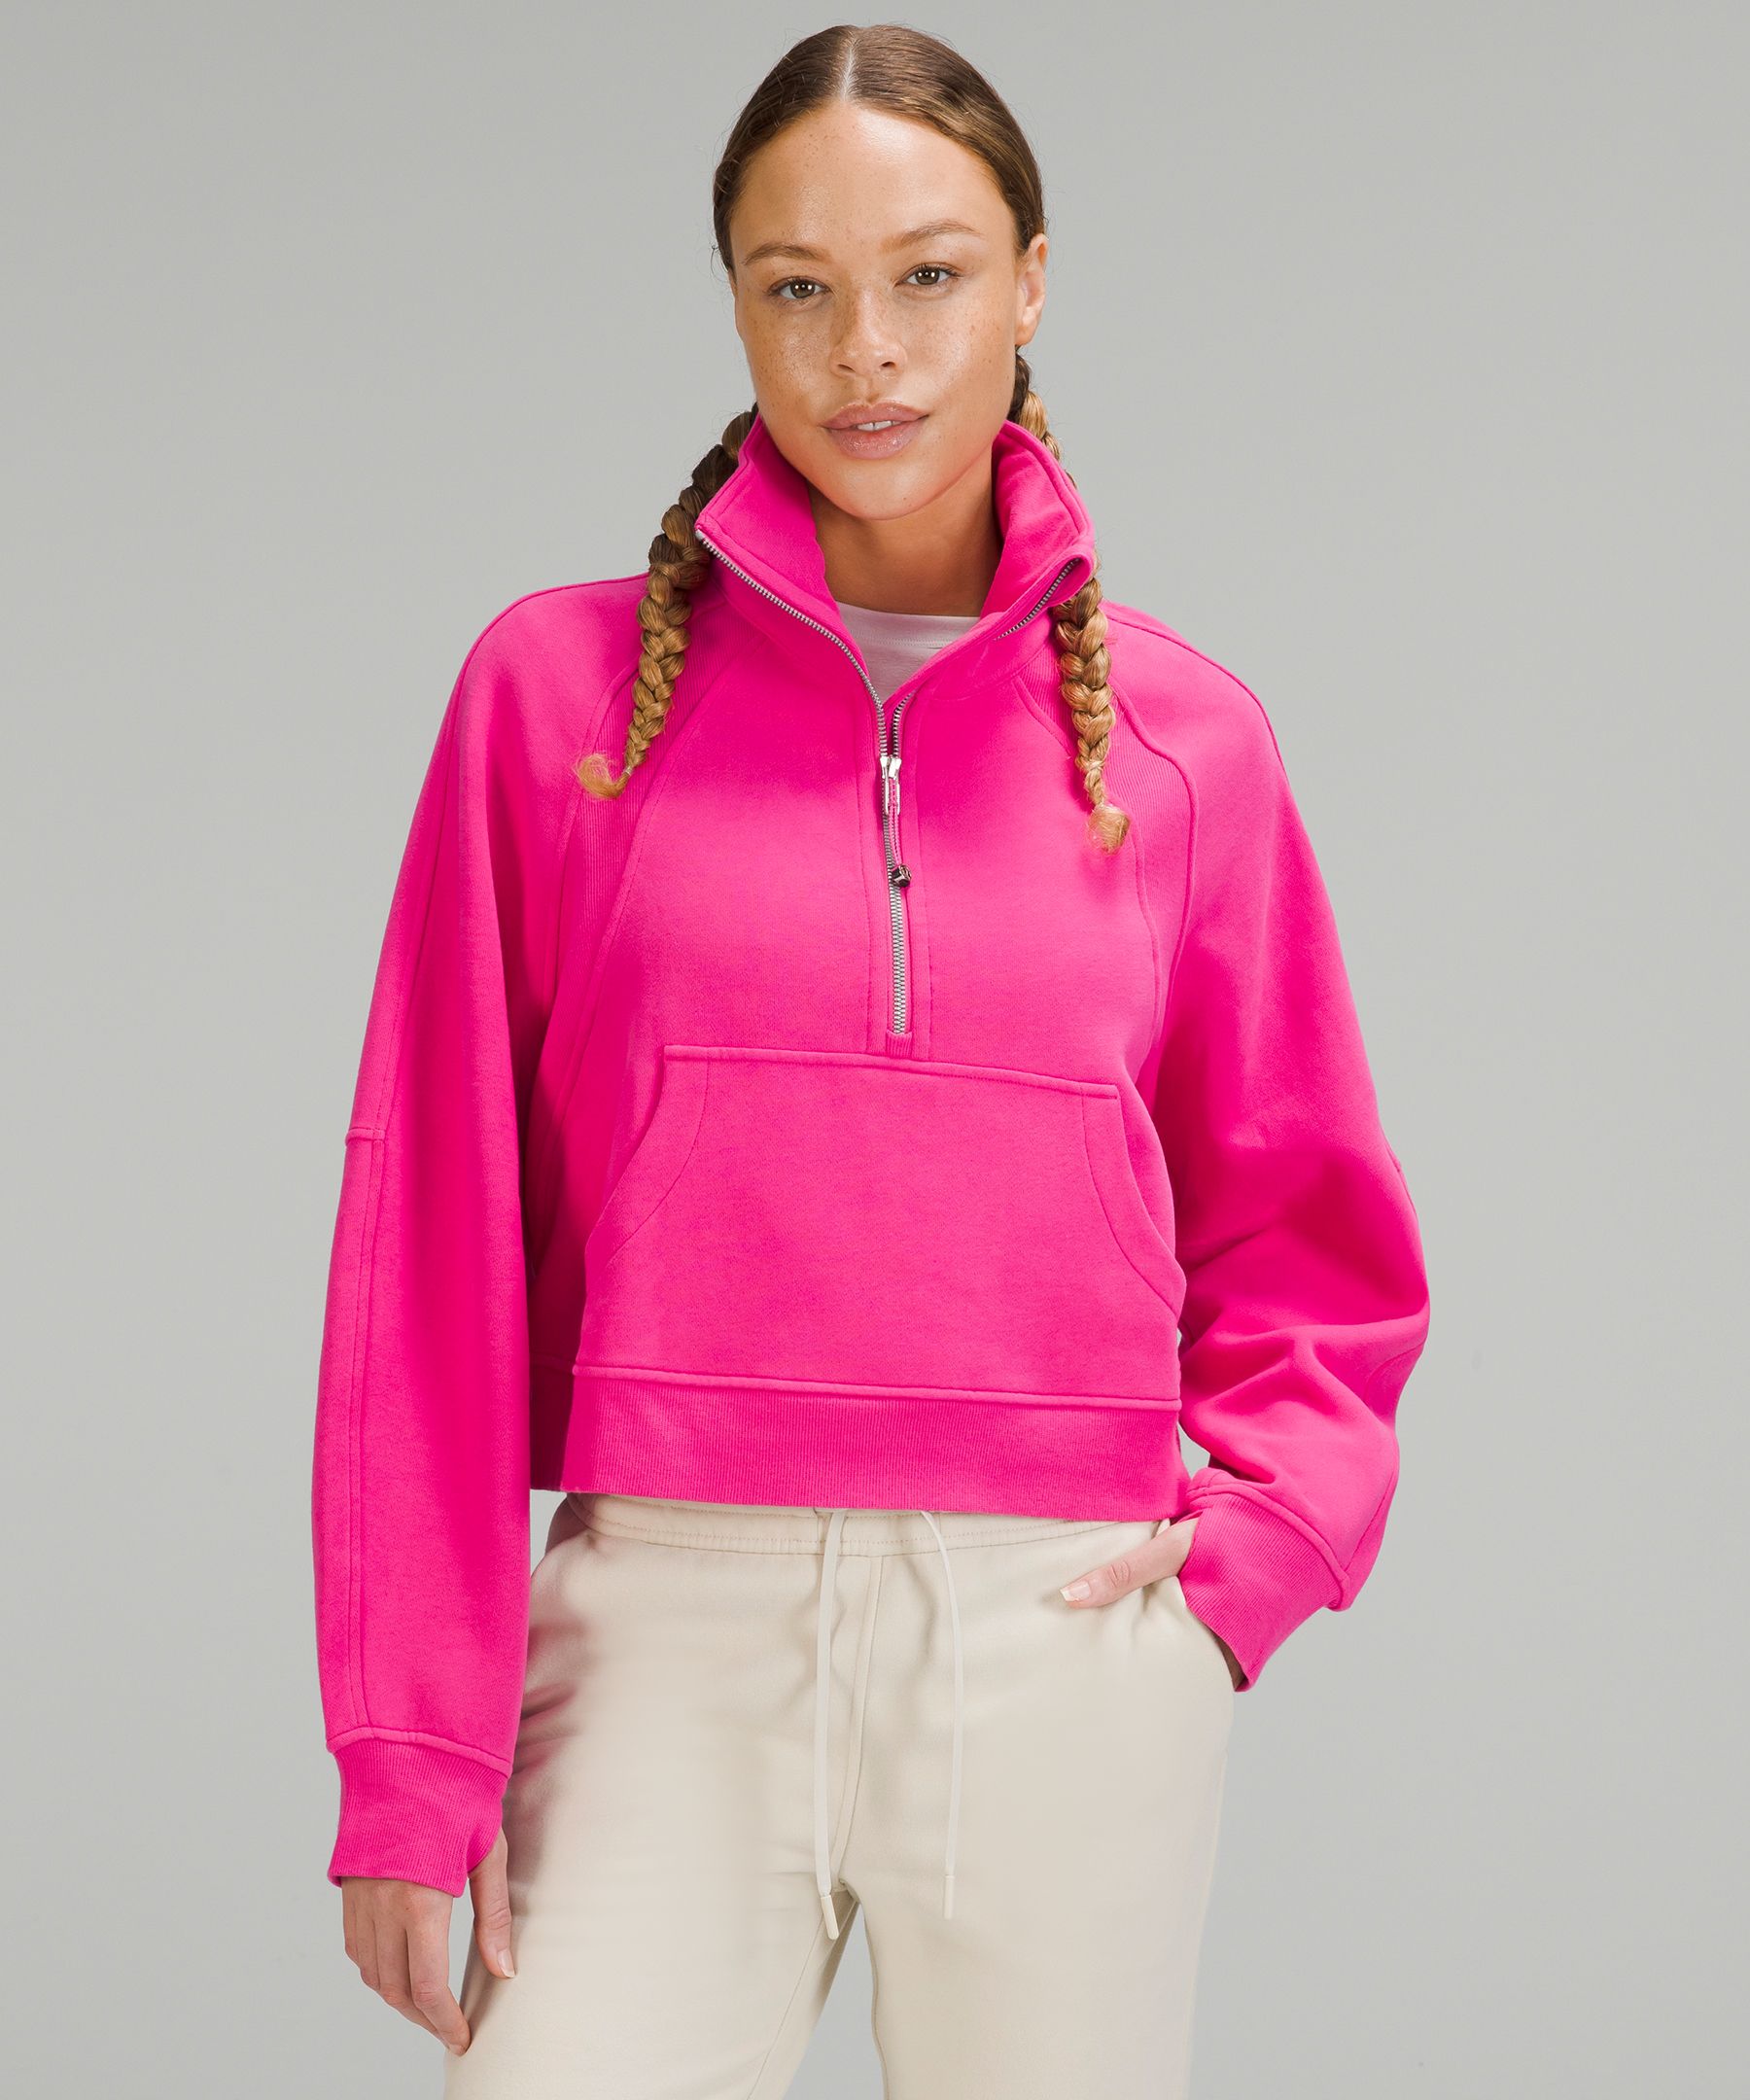 is the LULULEMON scuba half zip WORTH IT!? 🤔, Gallery posted by shanice